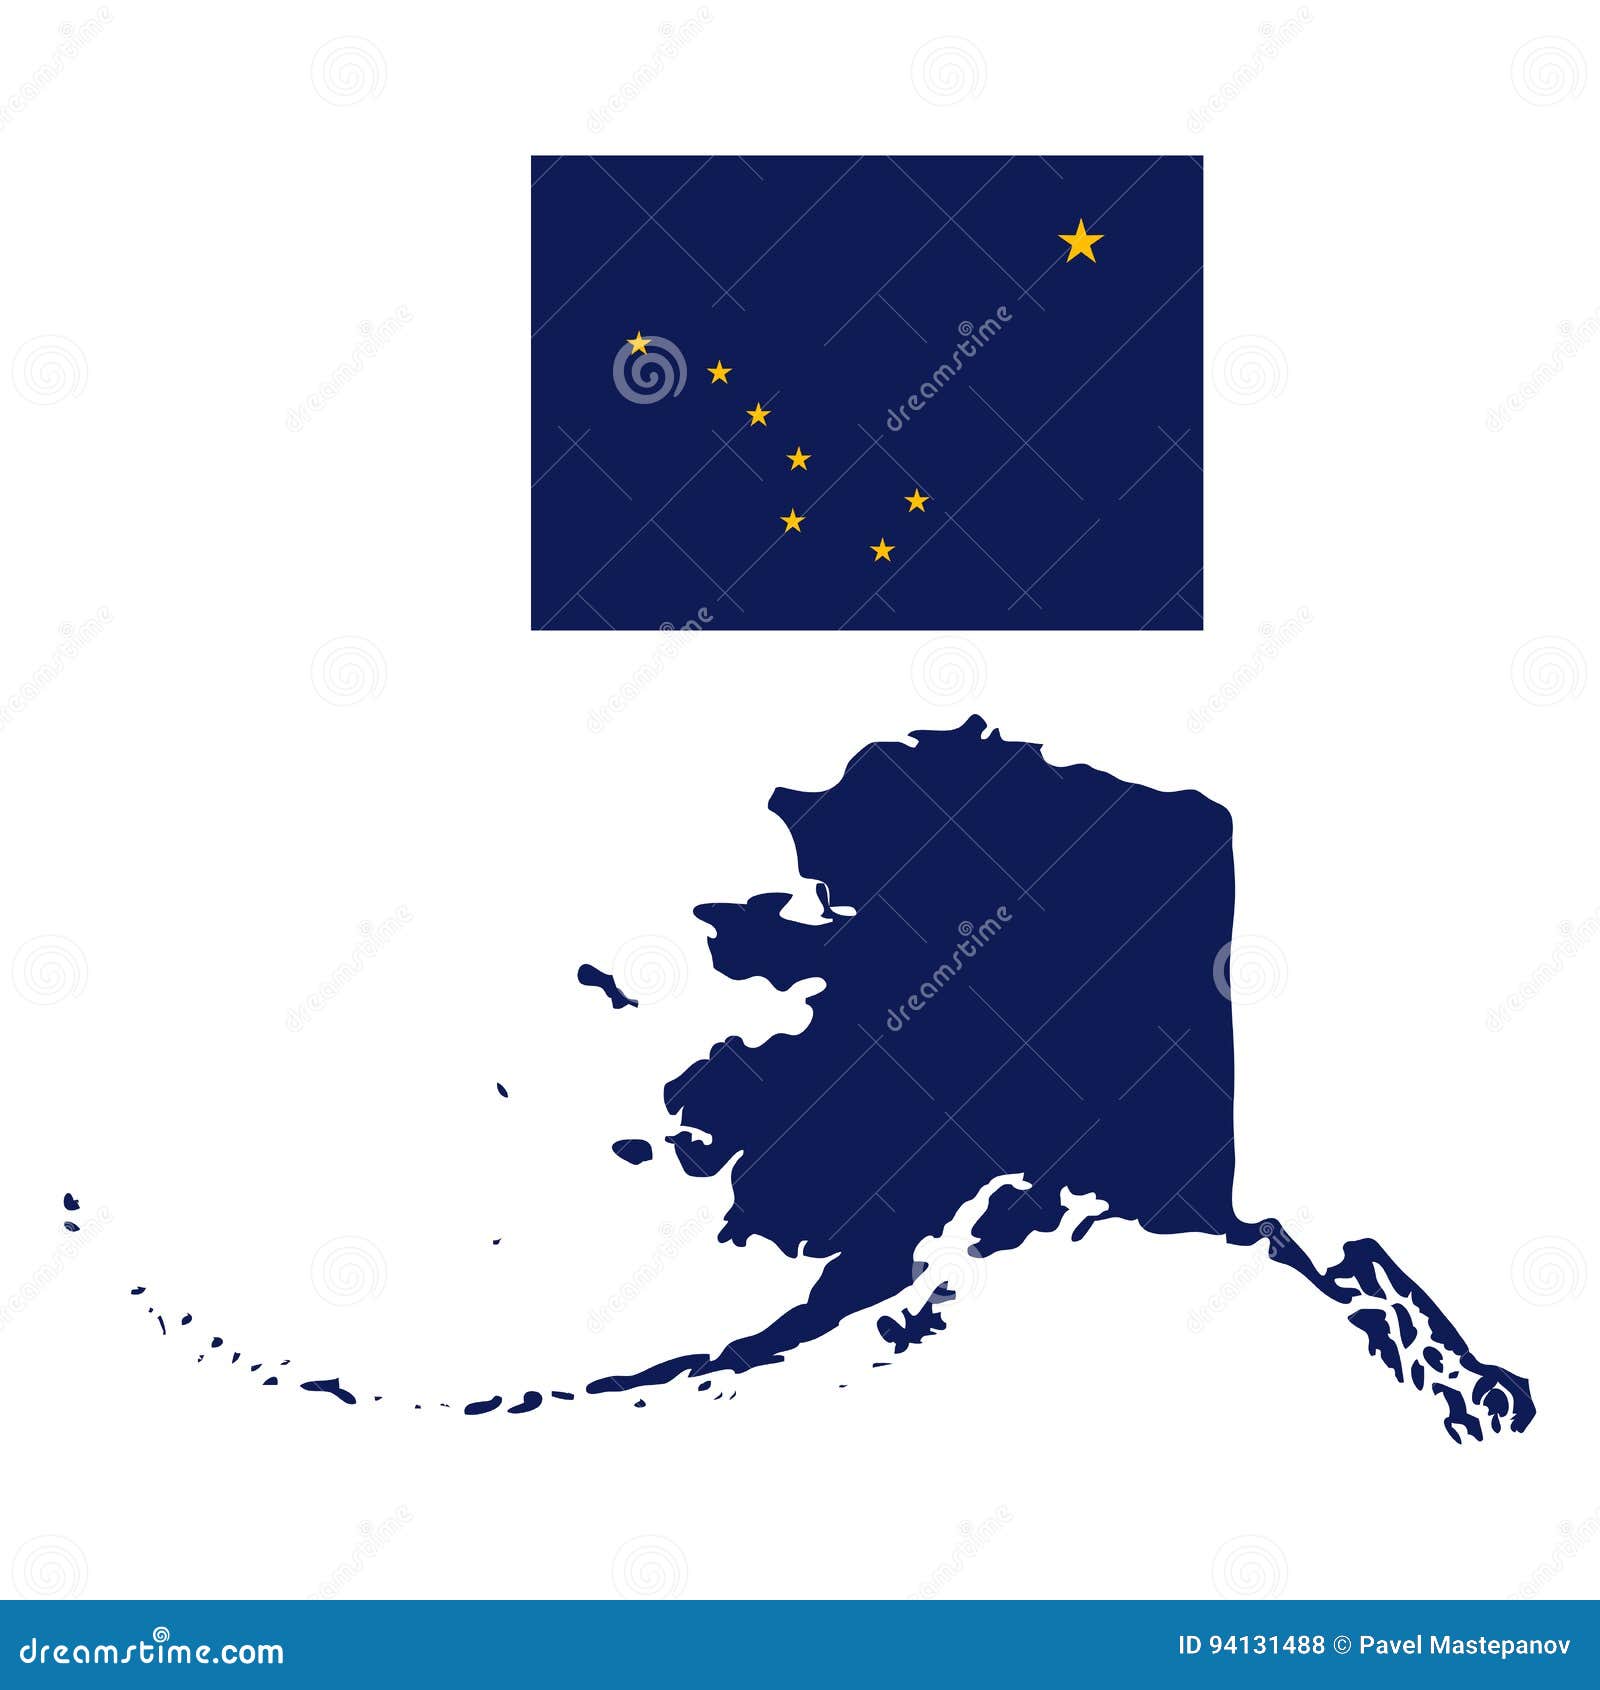 Alaska Flag And State Map Stock Vector Illustration Of Land 94131488